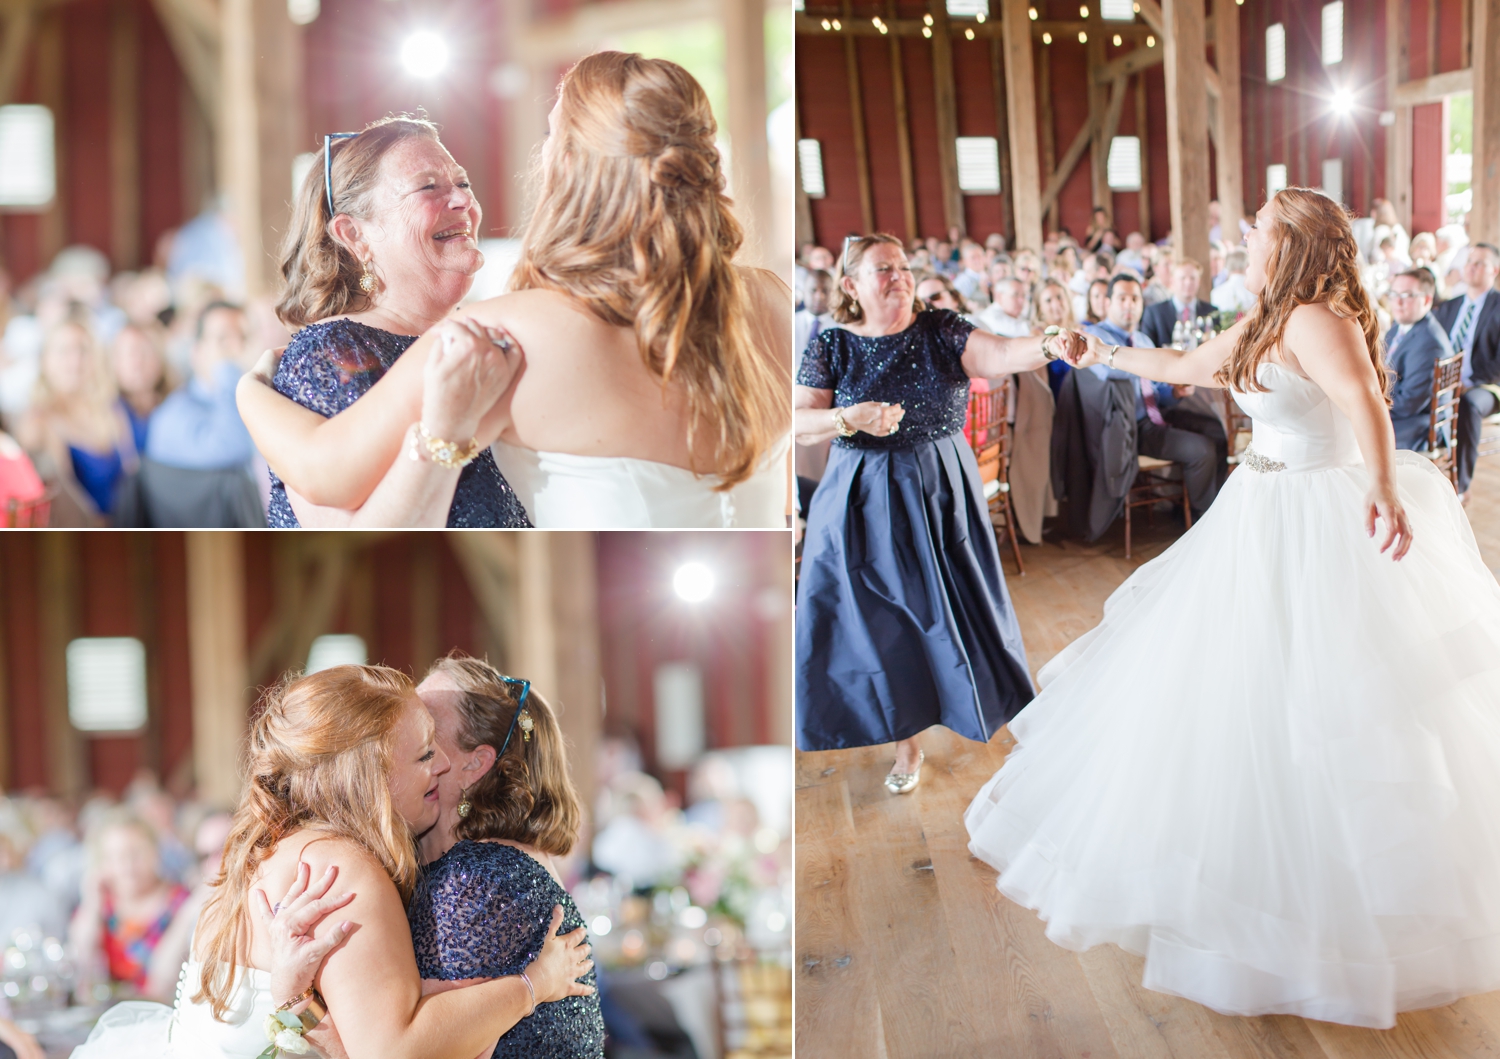  A very special mother/daughter dance. 